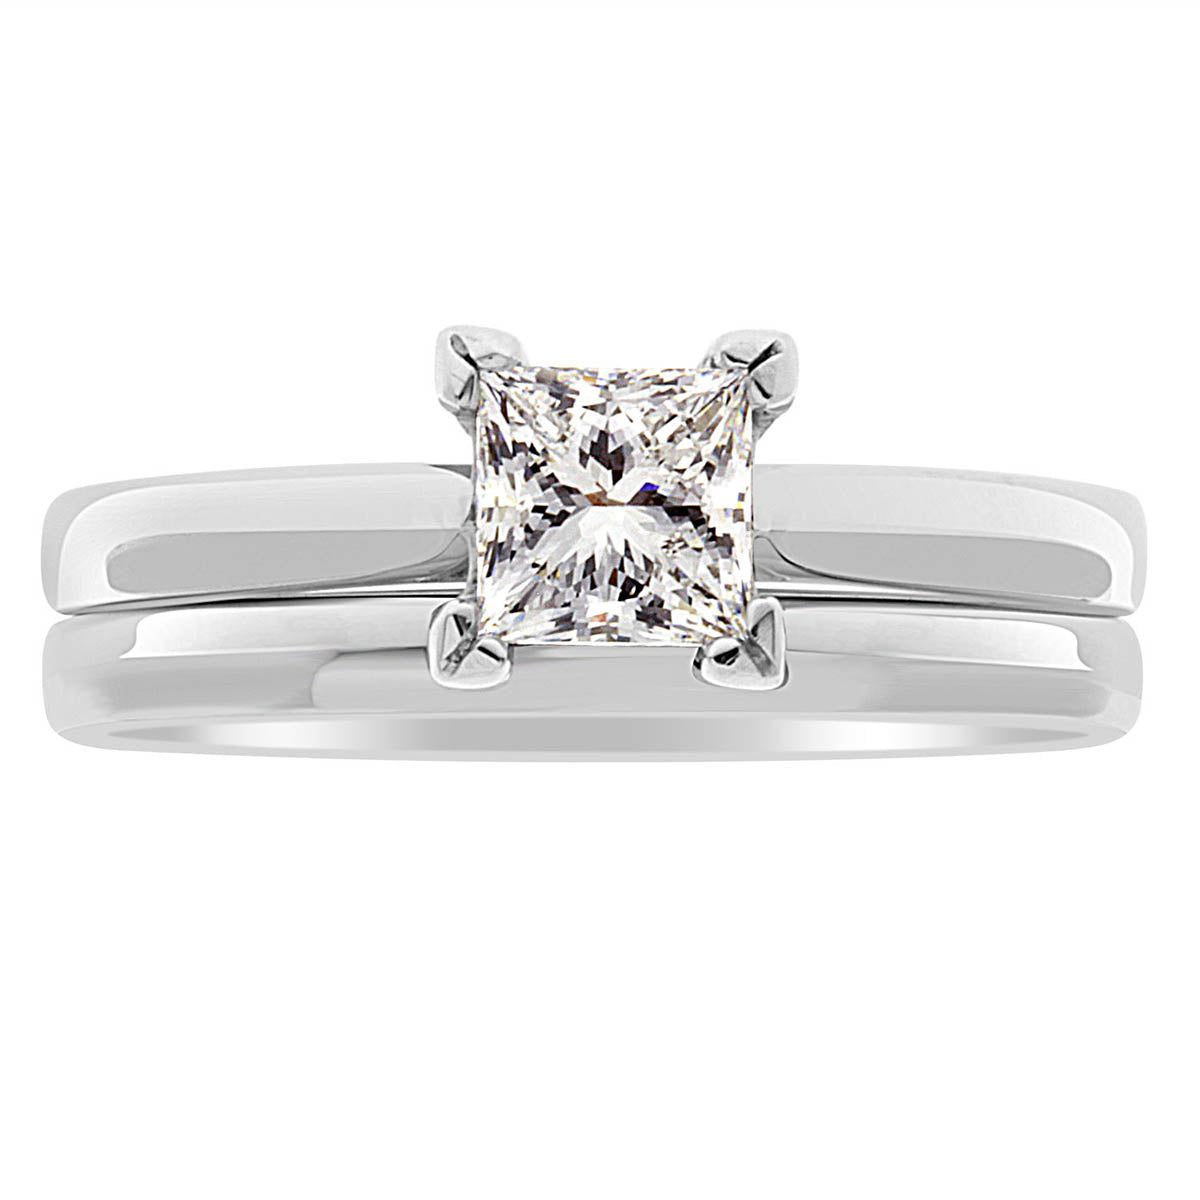 Princess Cut Solitaire  engagement ring in white gold with a matching wedding ring